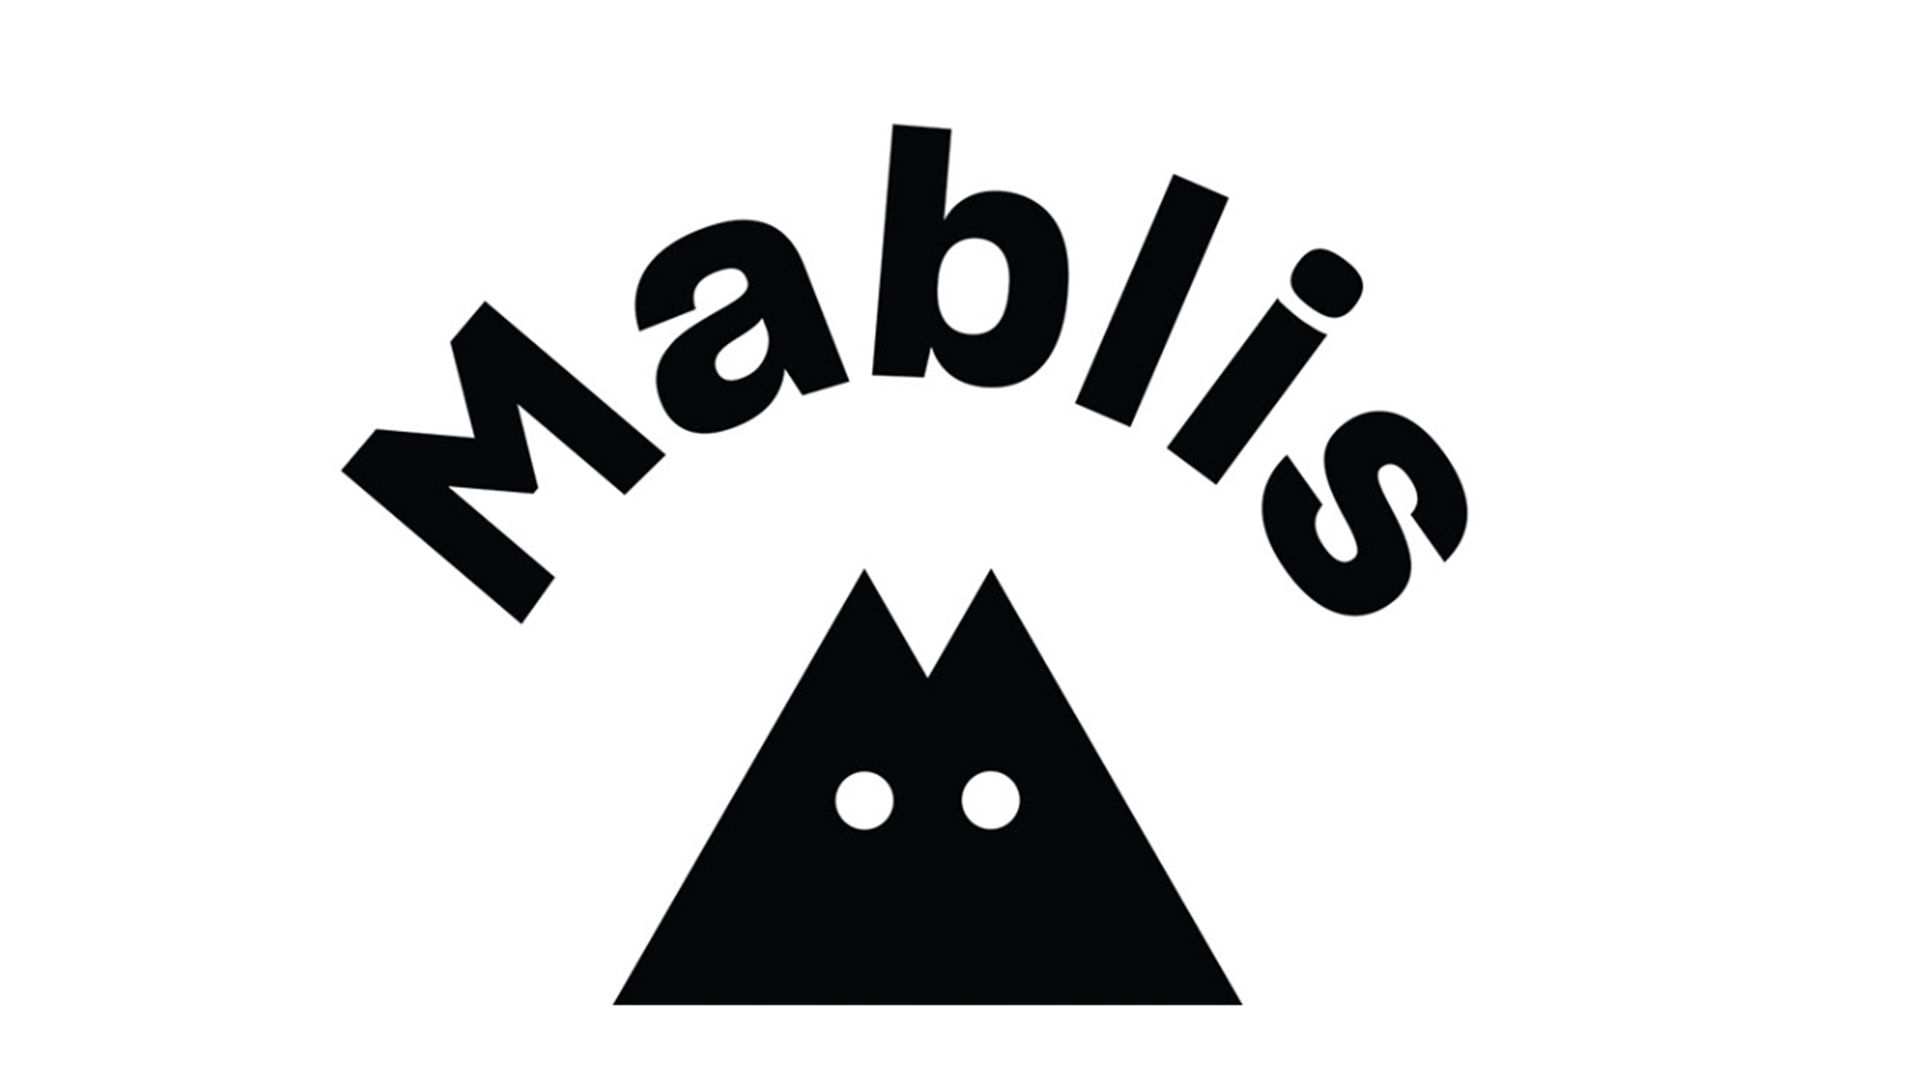 Cover Image for Mablis chooses Broadcast as their official festival app!